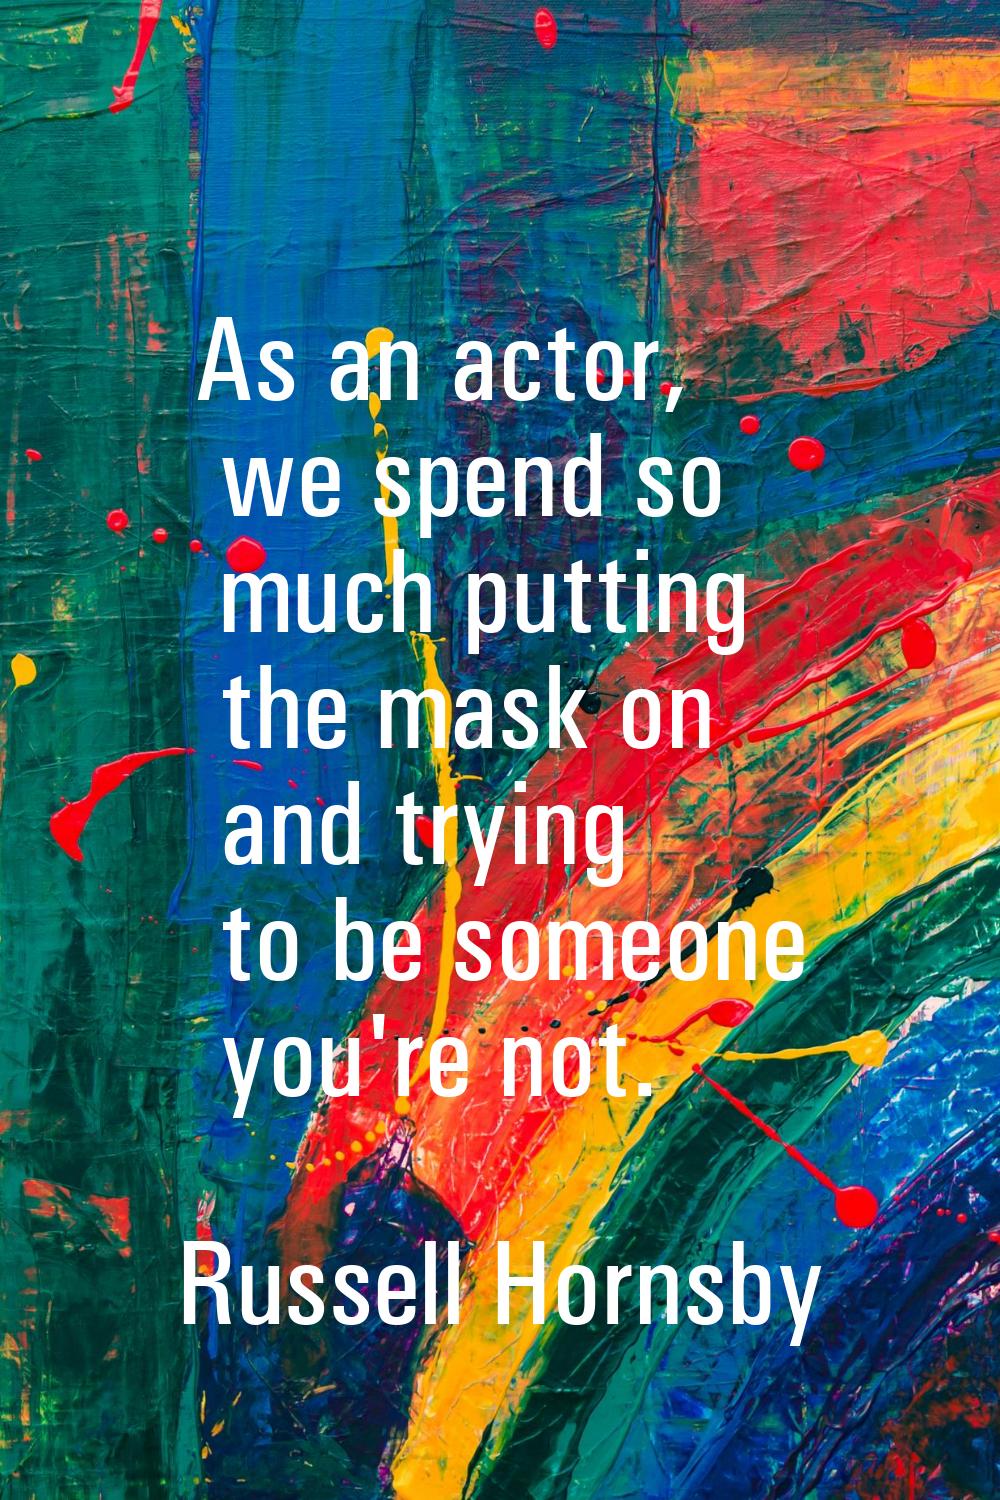 As an actor, we spend so much putting the mask on and trying to be someone you're not.